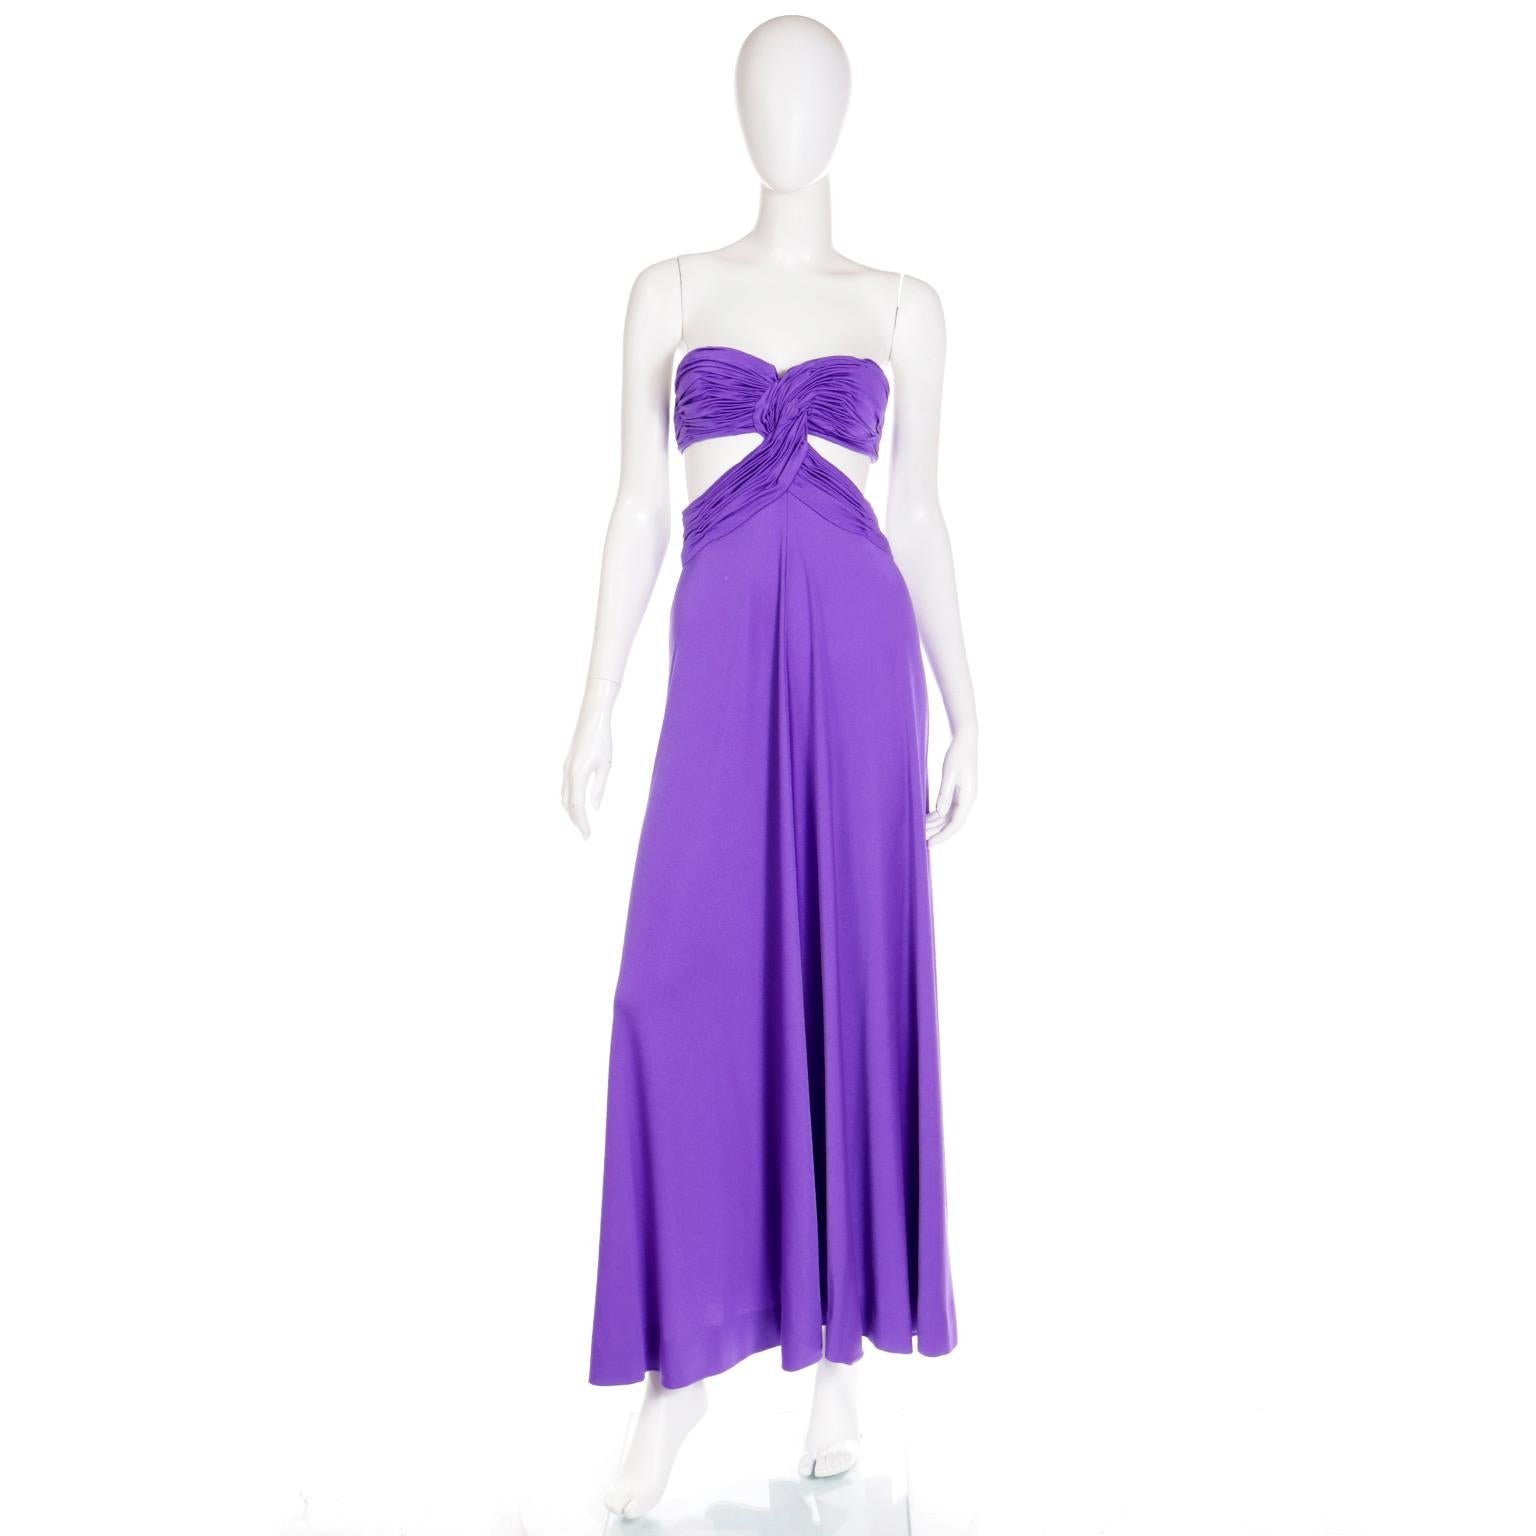 This sensational vintage Loris Azzaro purple jersey strapless evening dress is so incredible!  This dress has so many stunning details including a finely pleated bra style bodice The plisse pleating extends down to the waist and goes around to the